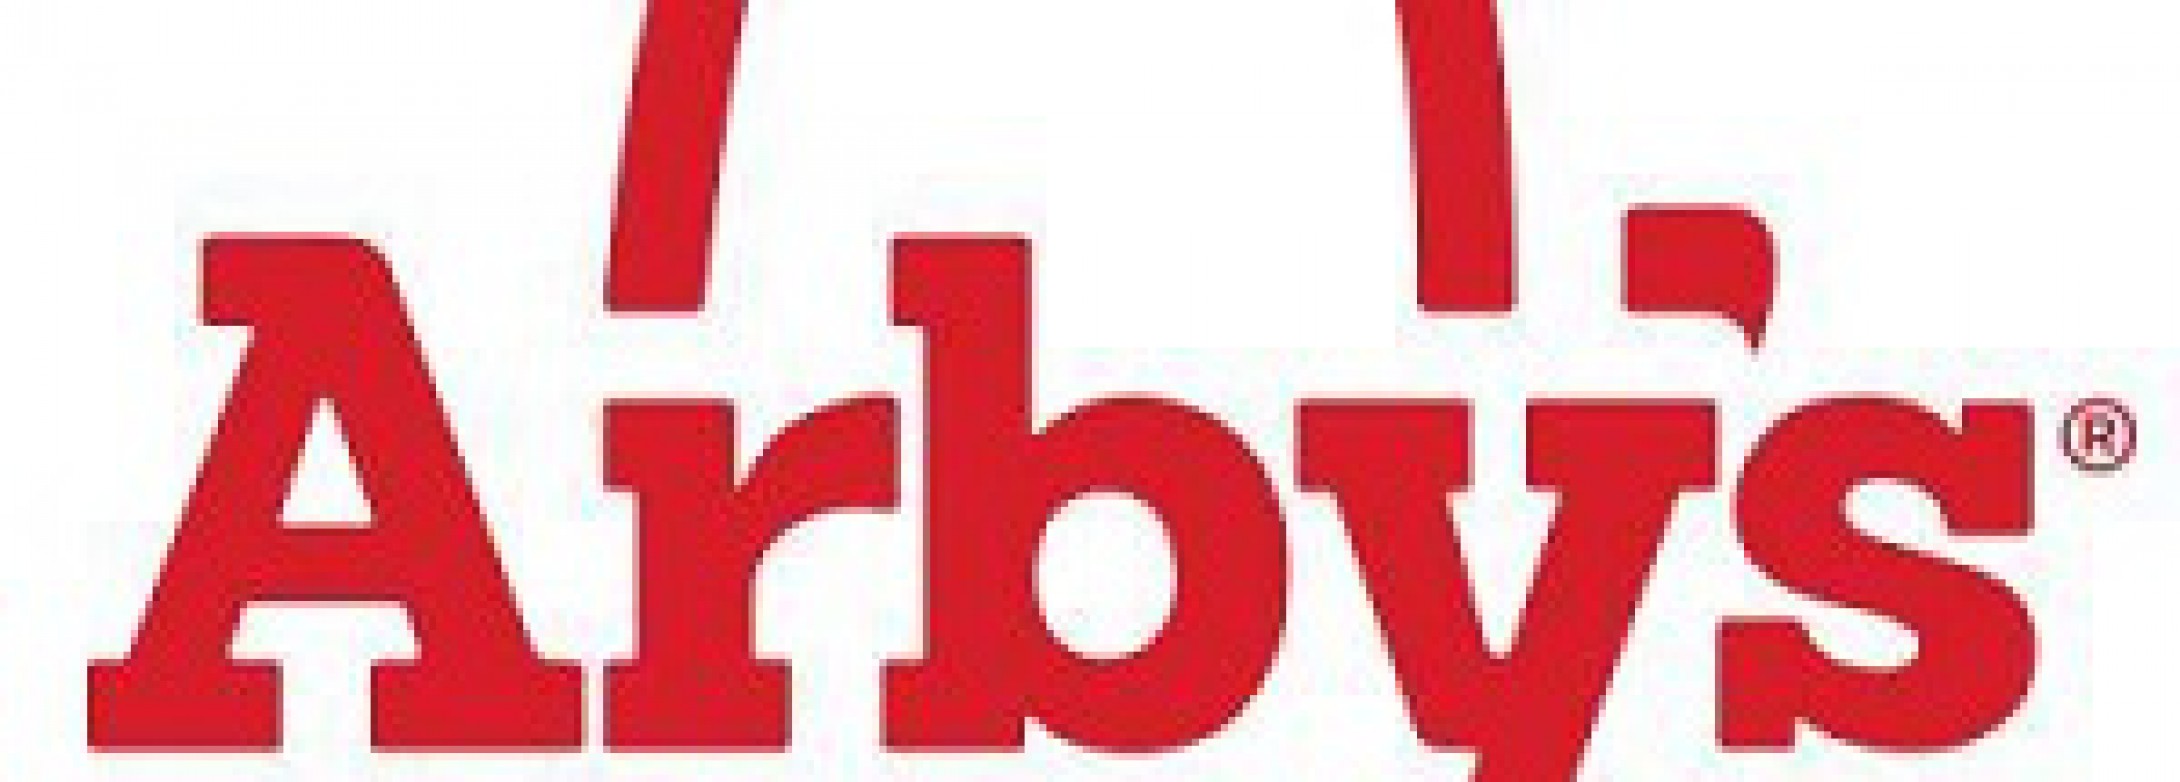 Arby’s: A Case Of Crisis Management and Potential Opportunity